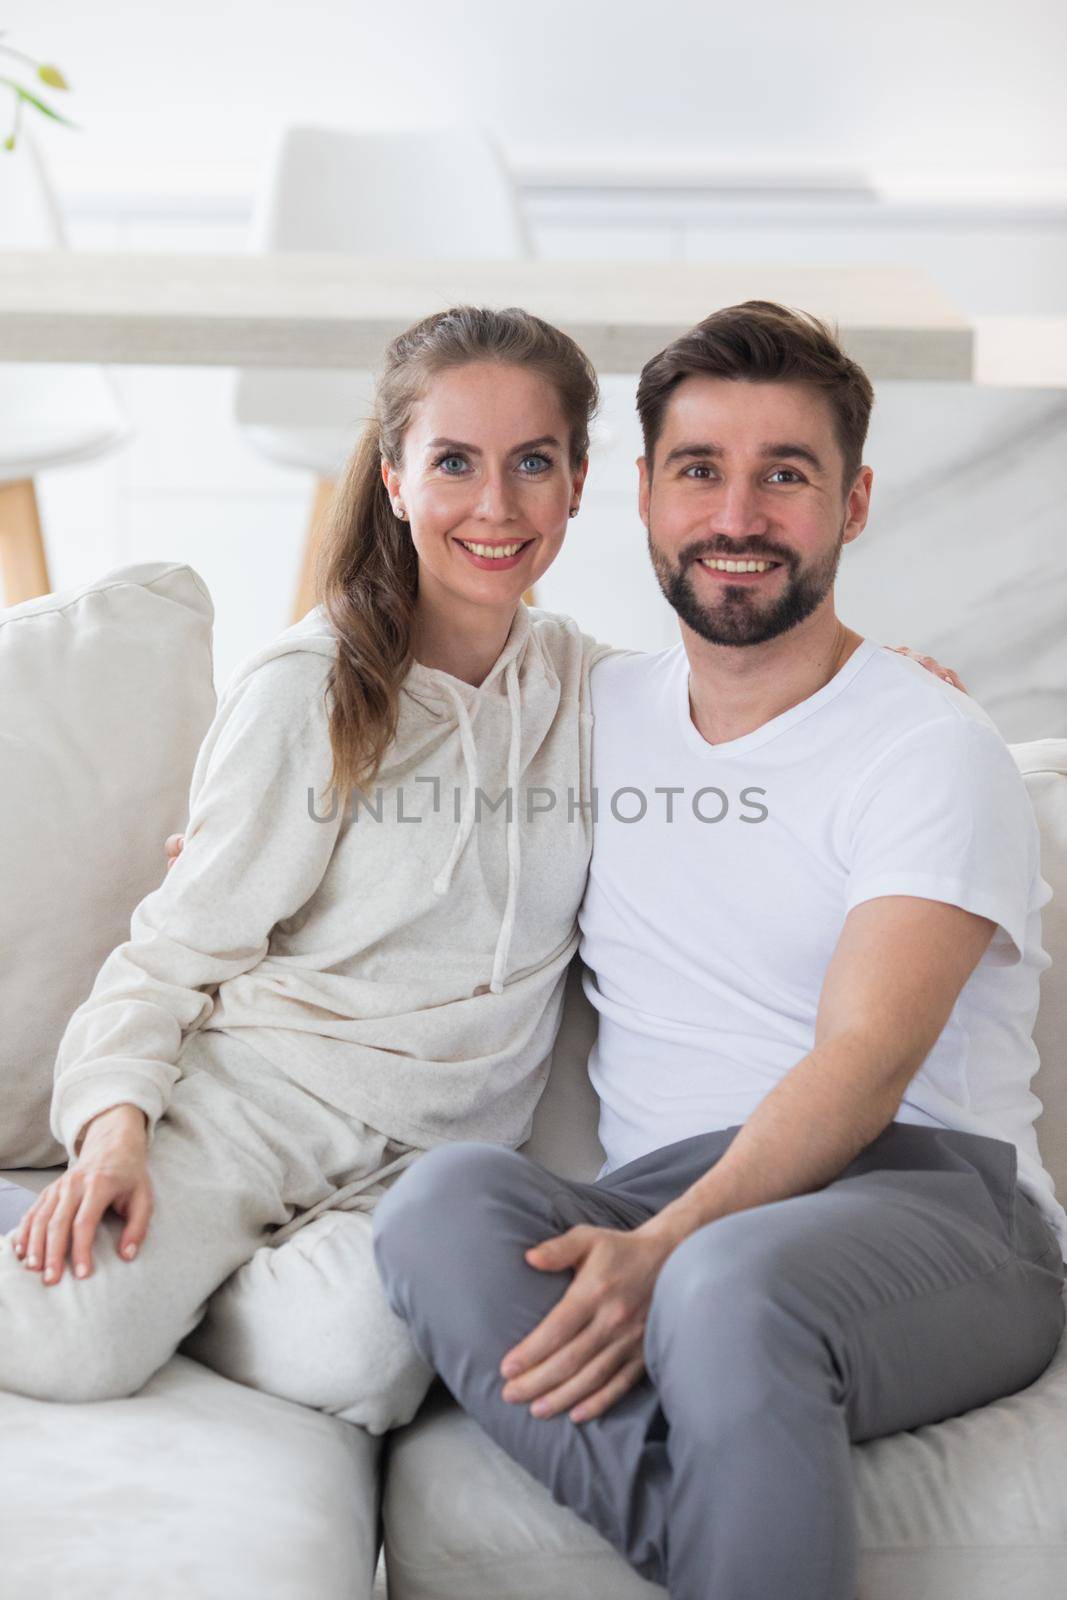 Portrait of smiling young man and woman spouse renters sit relax on comfortable couch in new apartment or house. Happy Caucasian couple rest on sofa in living room, moving to own home. Rental concept.